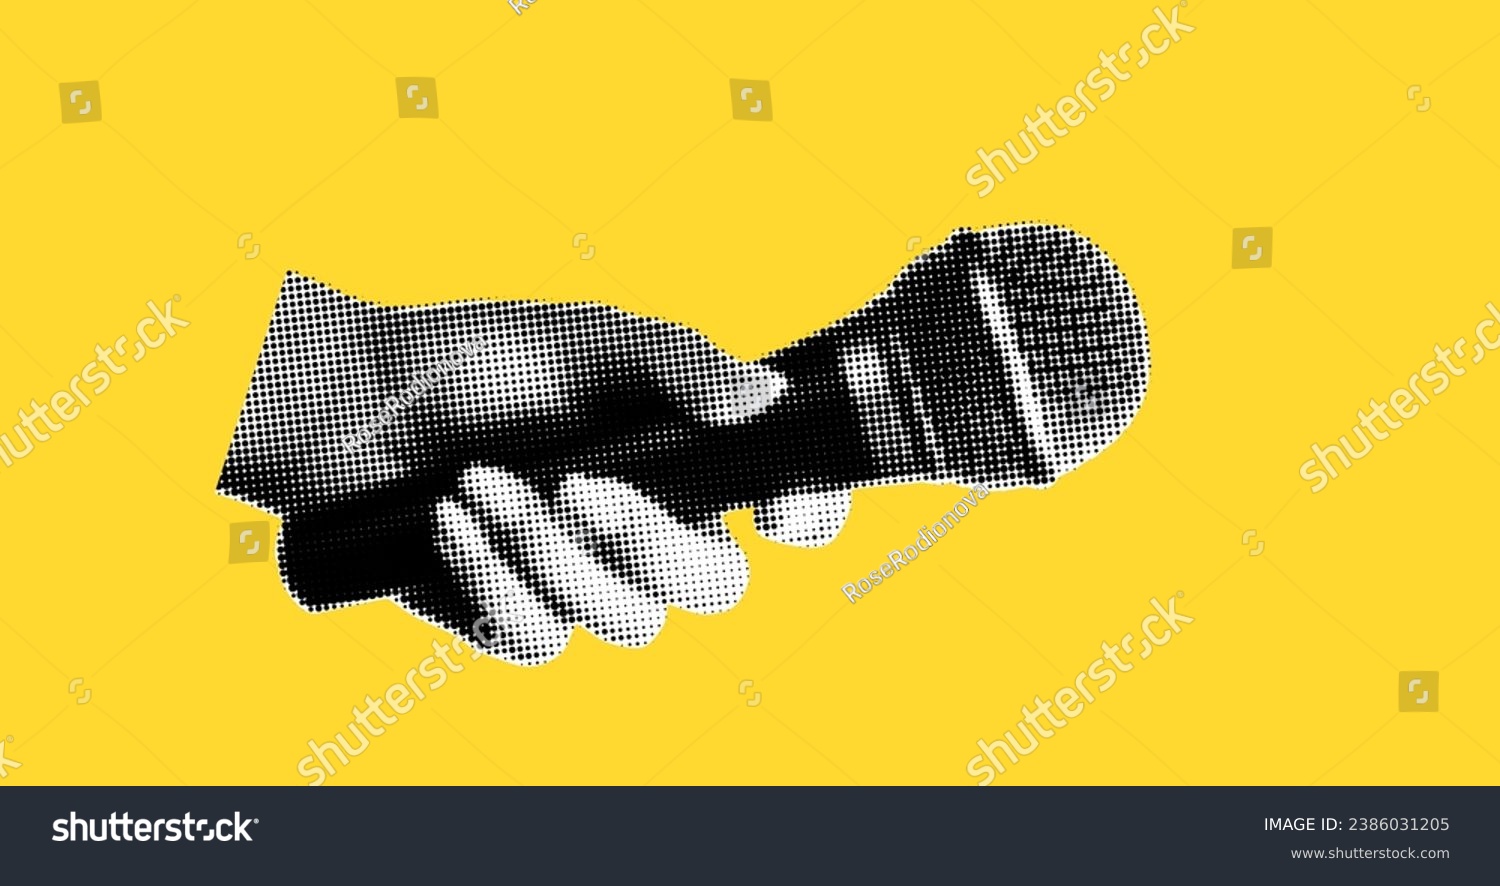 A hand holds a microphone. Collage element in halftone effect. Pop art illustration on bright yellow background. Vector png.  #2386031205